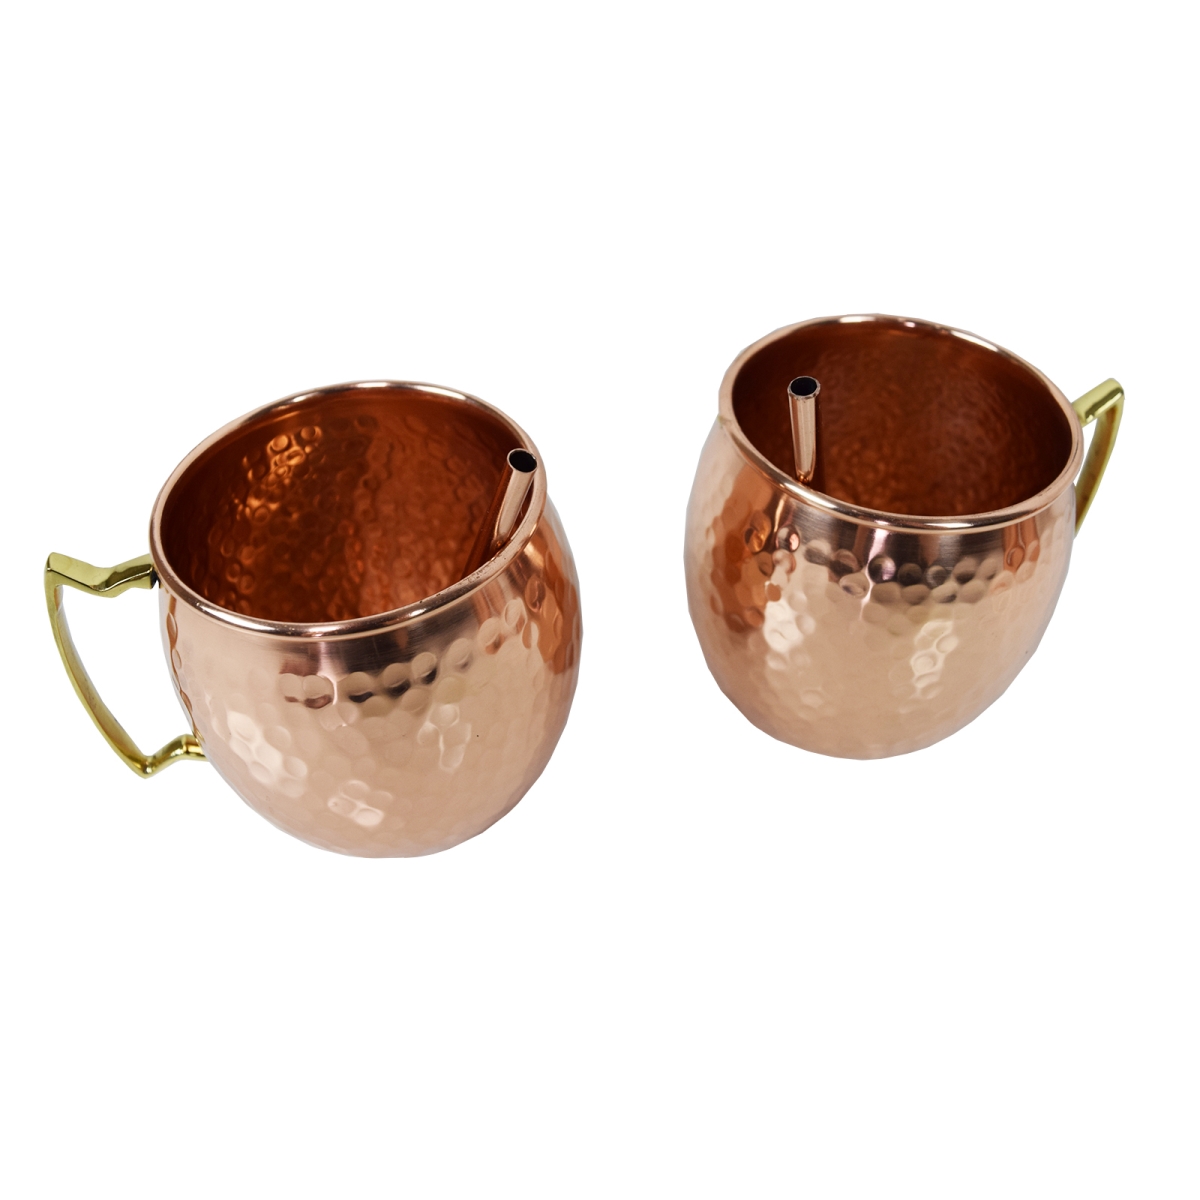 Oakland Living Zmug-ham-round-co 17 Oz Solid Round Pair Of 100 Percent Moscow Mule Mug Cups With Two Copper Straws, Copper